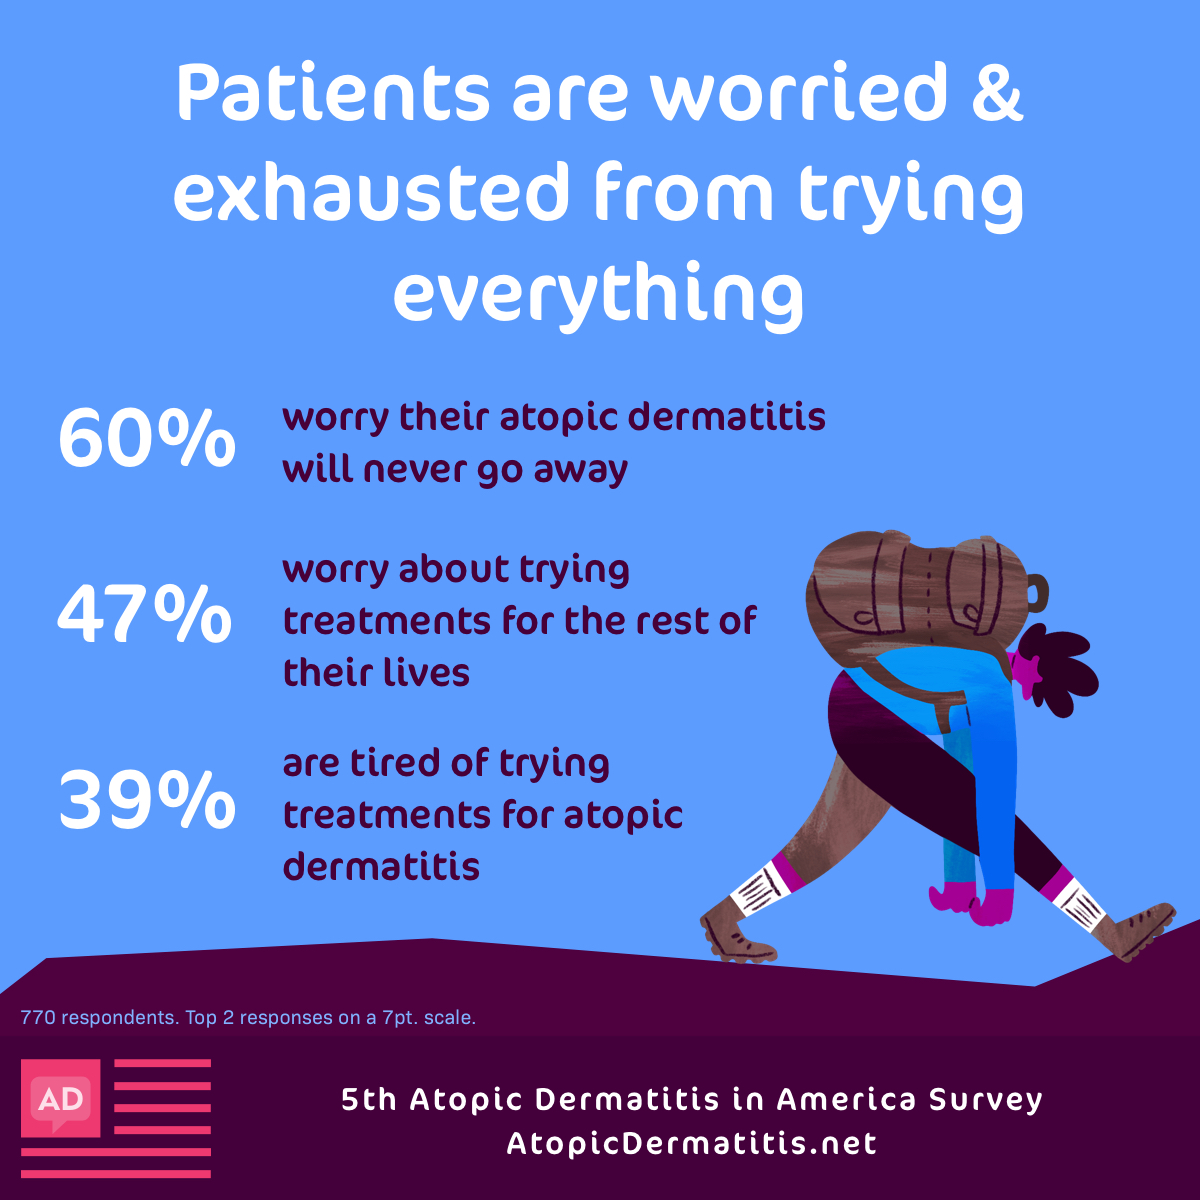 60% of respondents worry their atopic dermatitis will never go away and 47% worry about trying treatments for the rest of their lives.